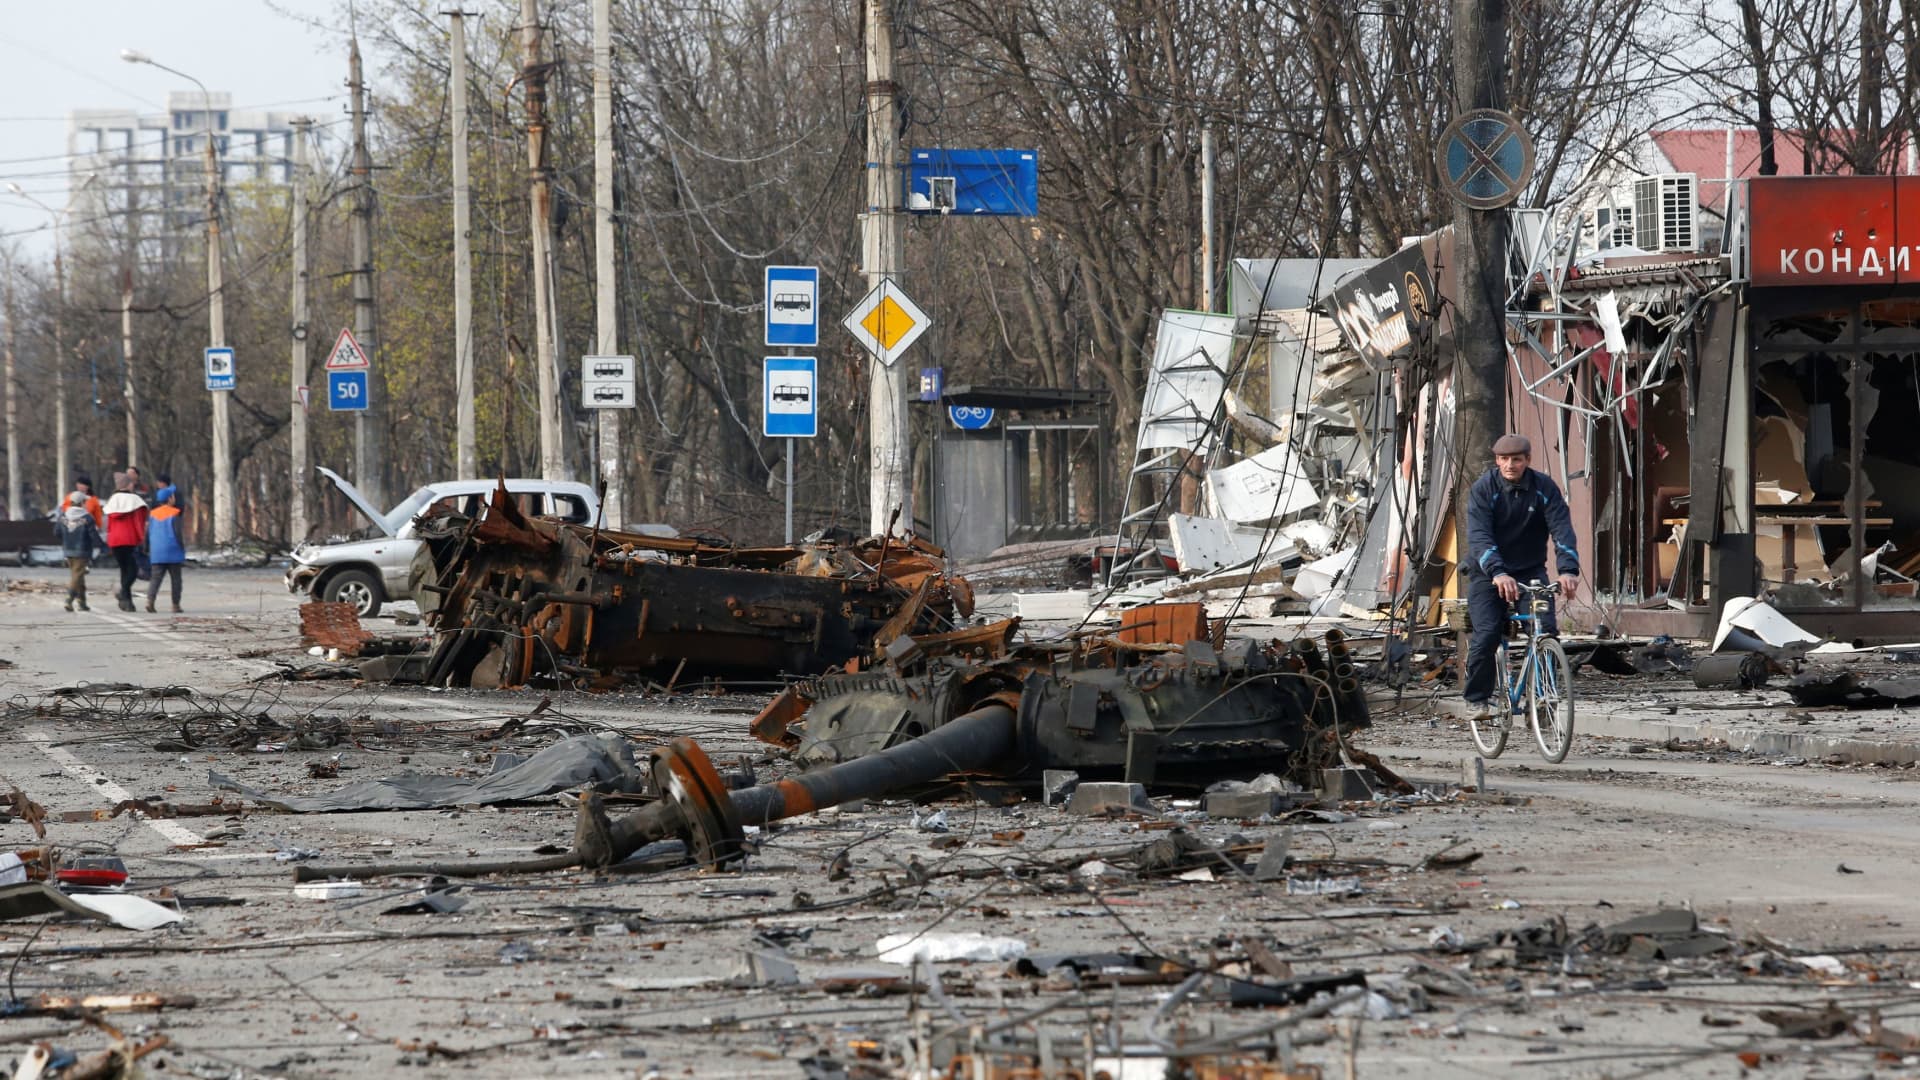 A man rides a bicycle near a destroyed tank during Ukraine-Russia conflict in the southern port city of Mariupol, Ukraine, on April 17, 2022.